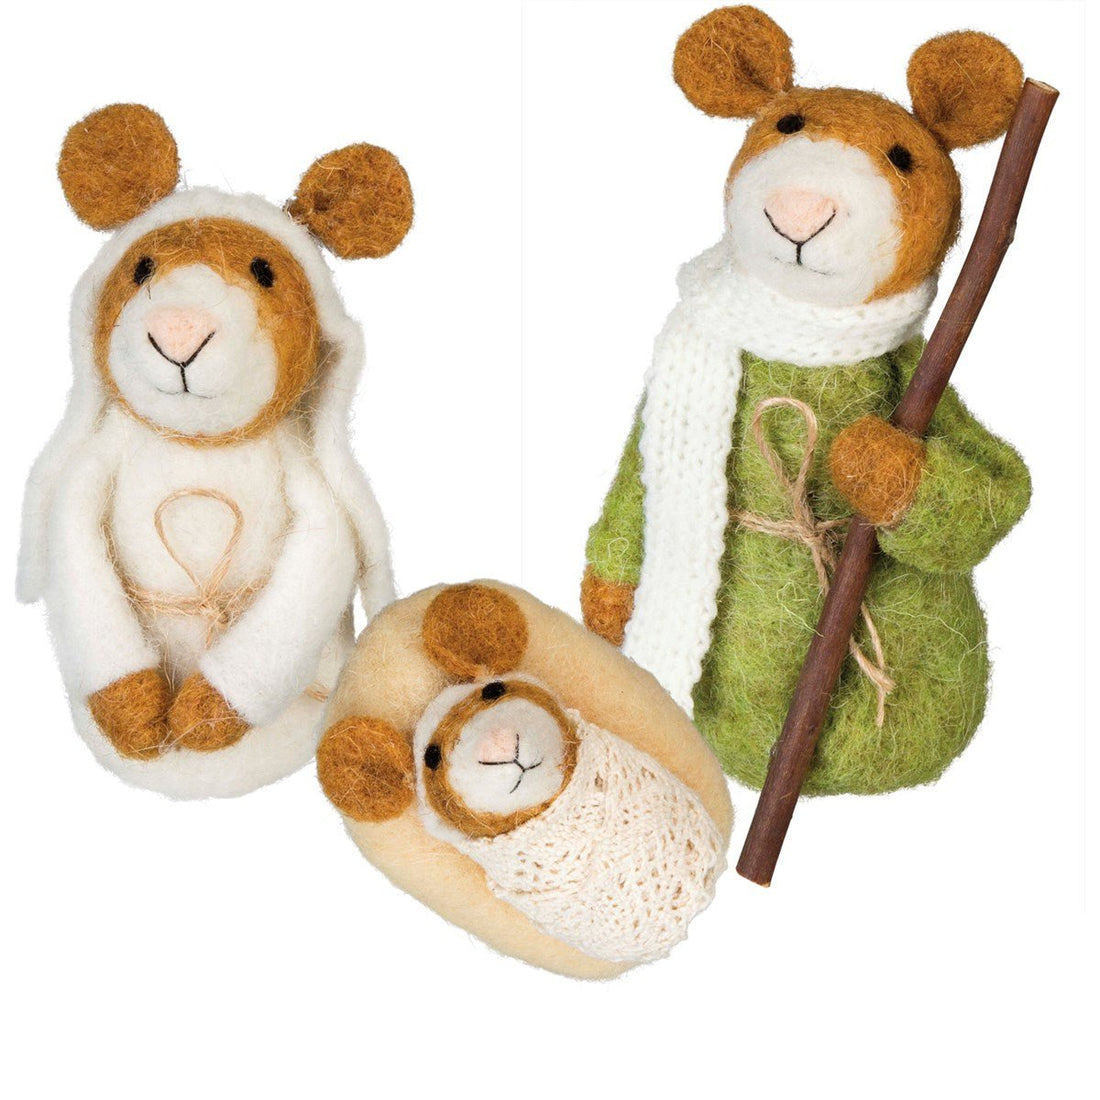 Christmas Primitive Felted Nativity Mice Mouse 3 pc - The Primitive Pineapple Collection